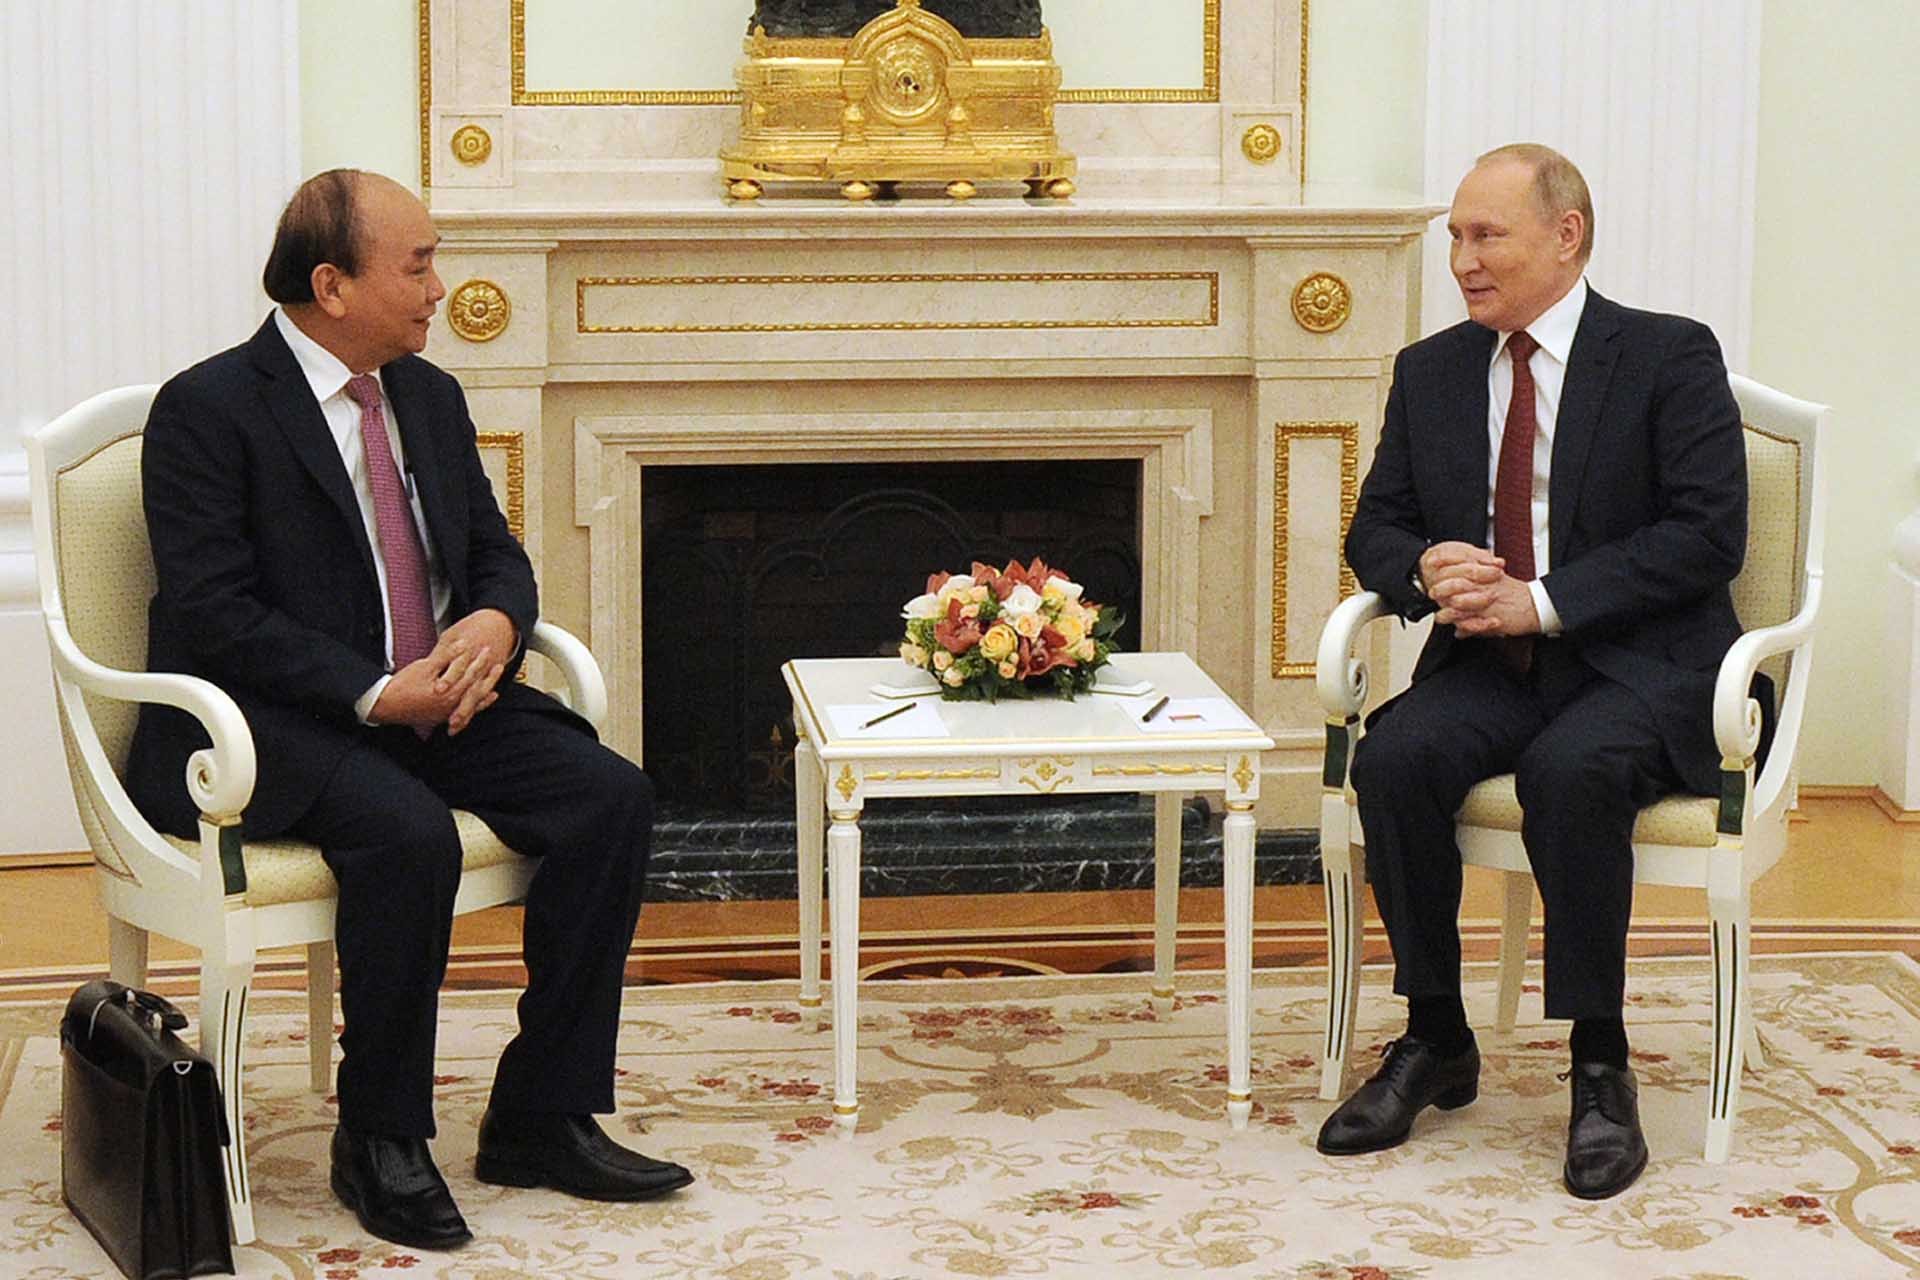 Russia, Vietnam strive to further promote partnership: Russian media